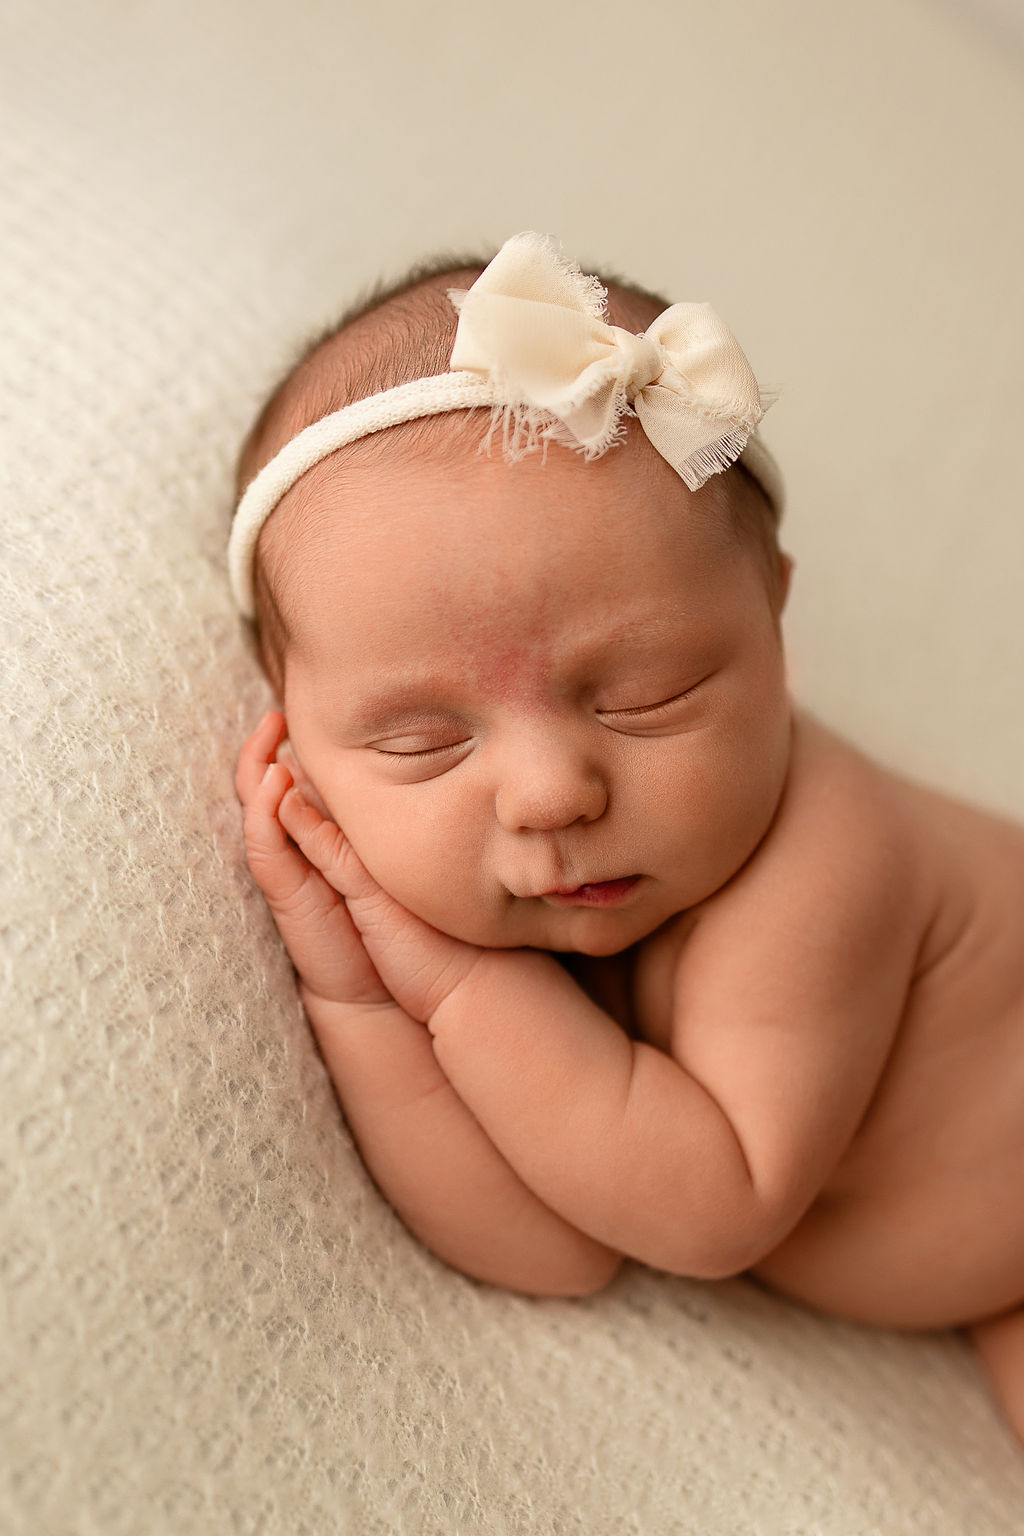 A newborn baby sleeps on her hands in a white bow thanks to lactation consultant milwaukee